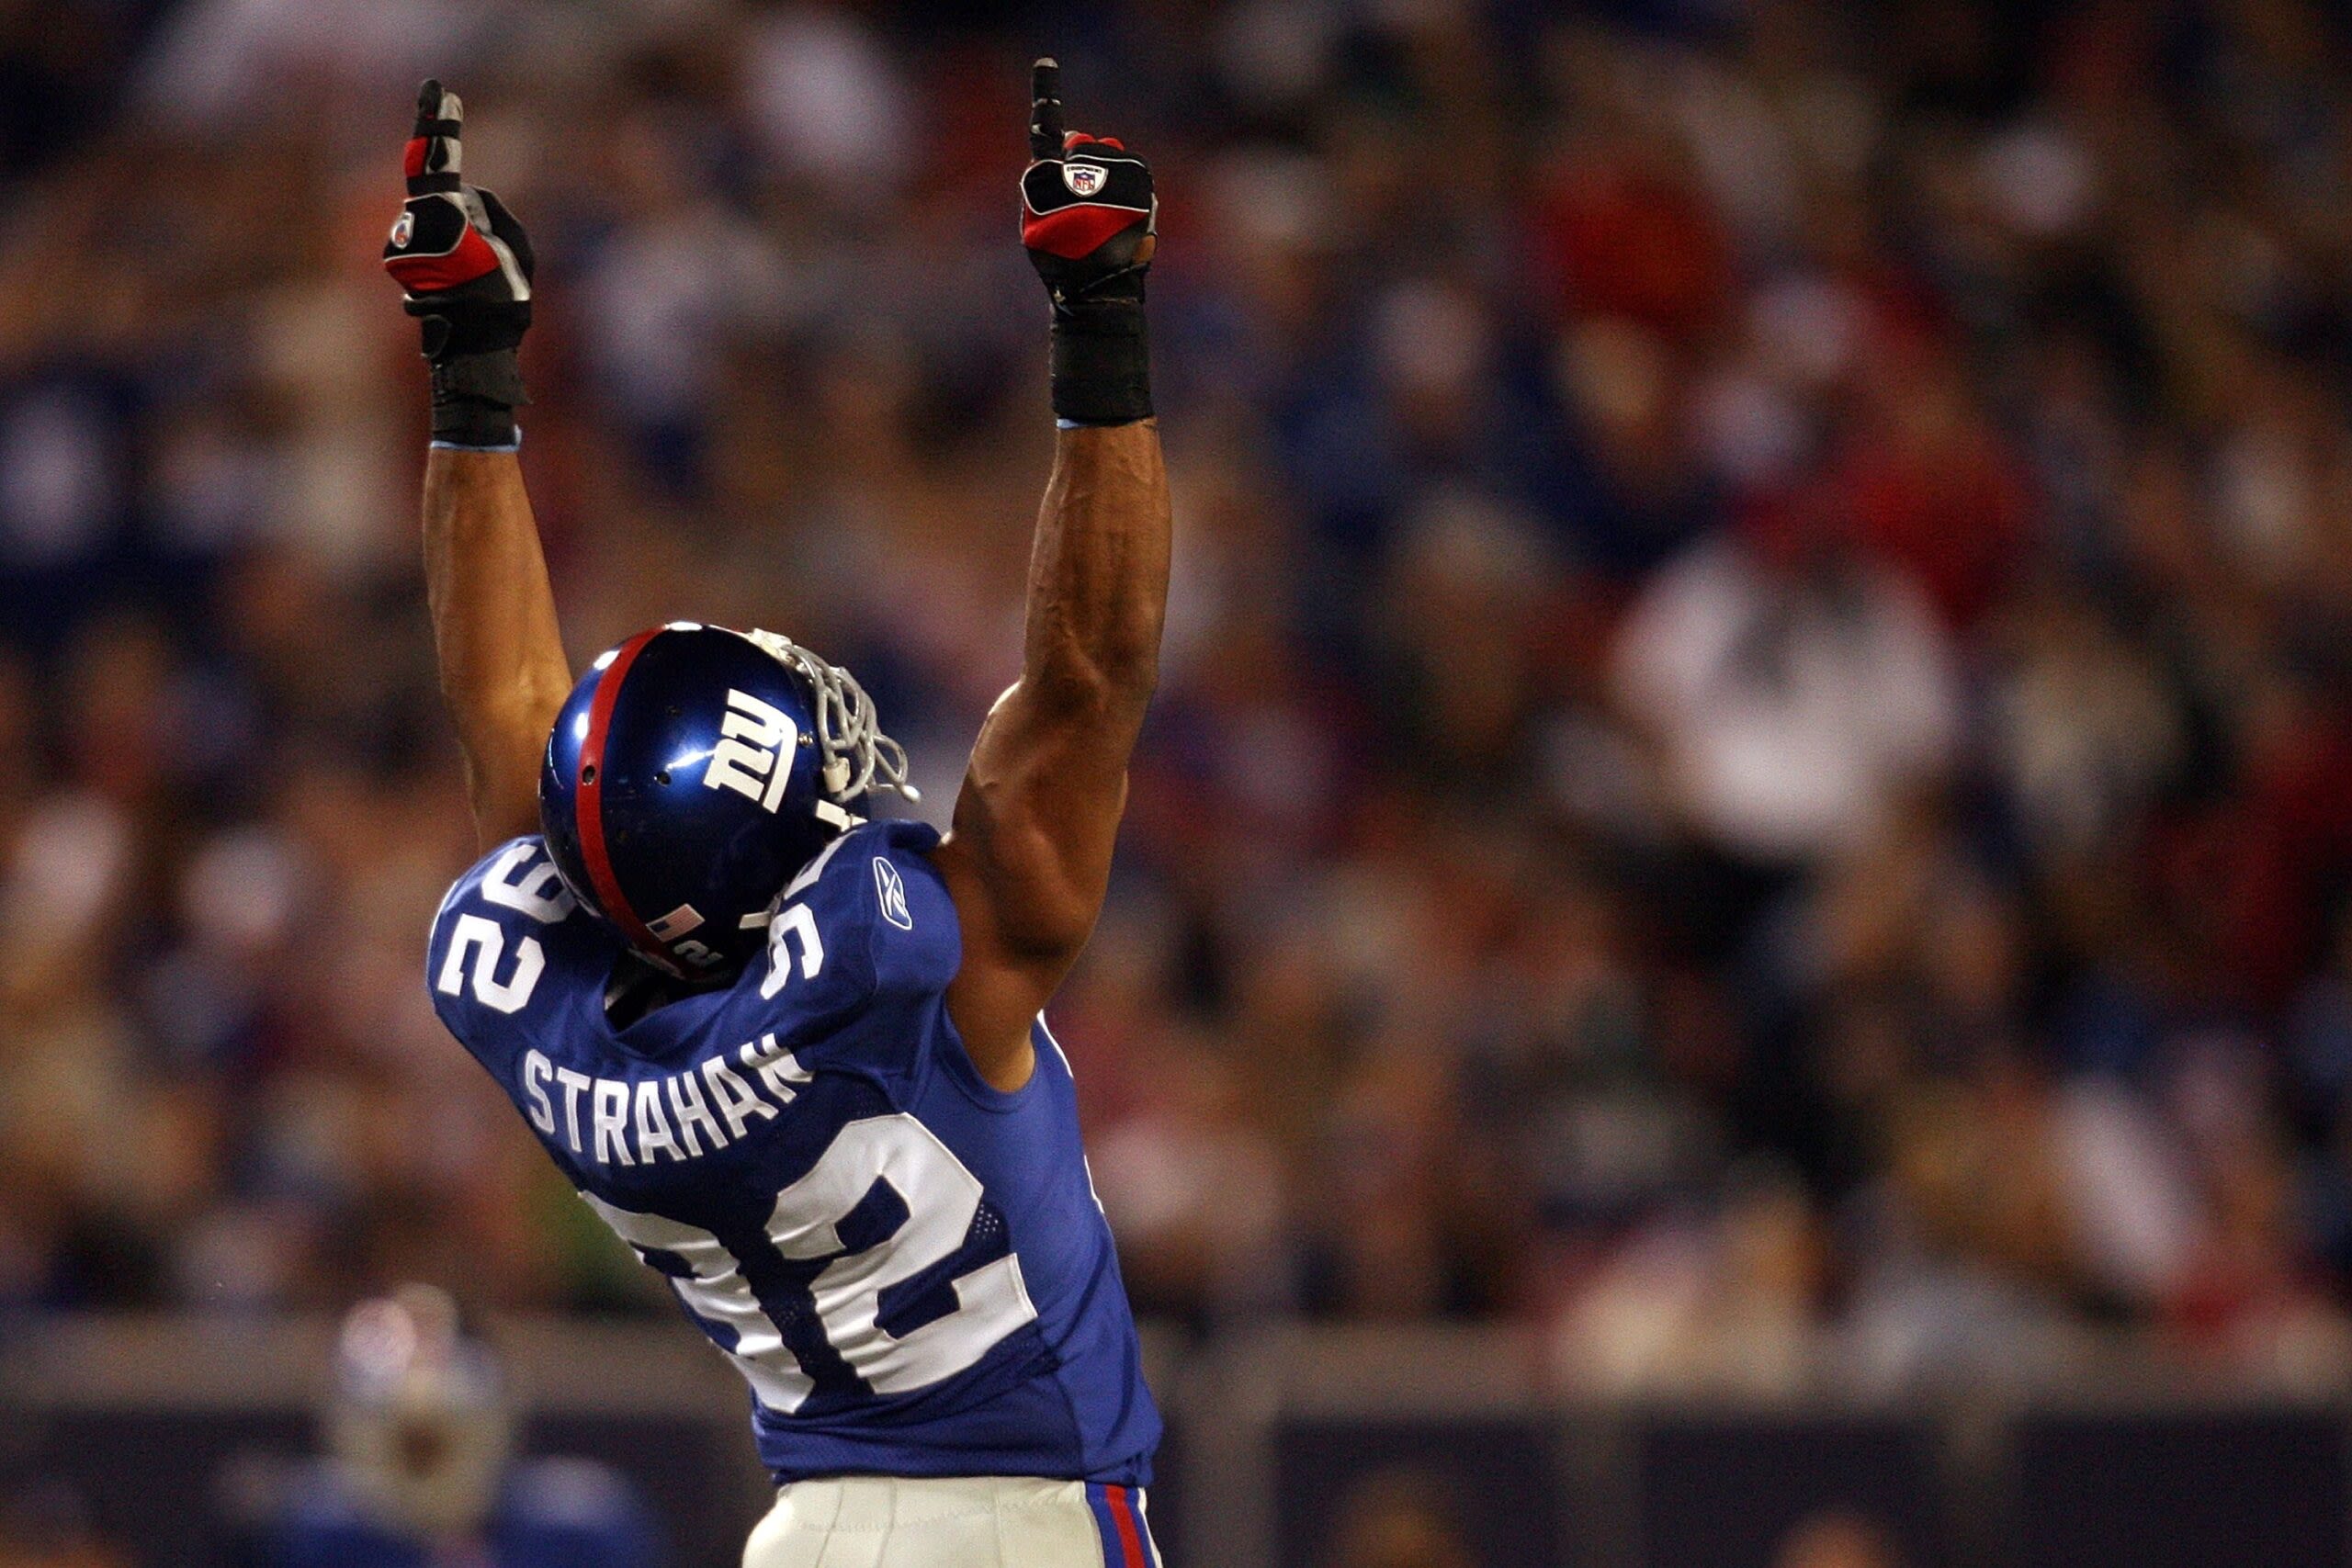 Giants legend Michael Strahan ranked among top 25 NFL players of the 21st century